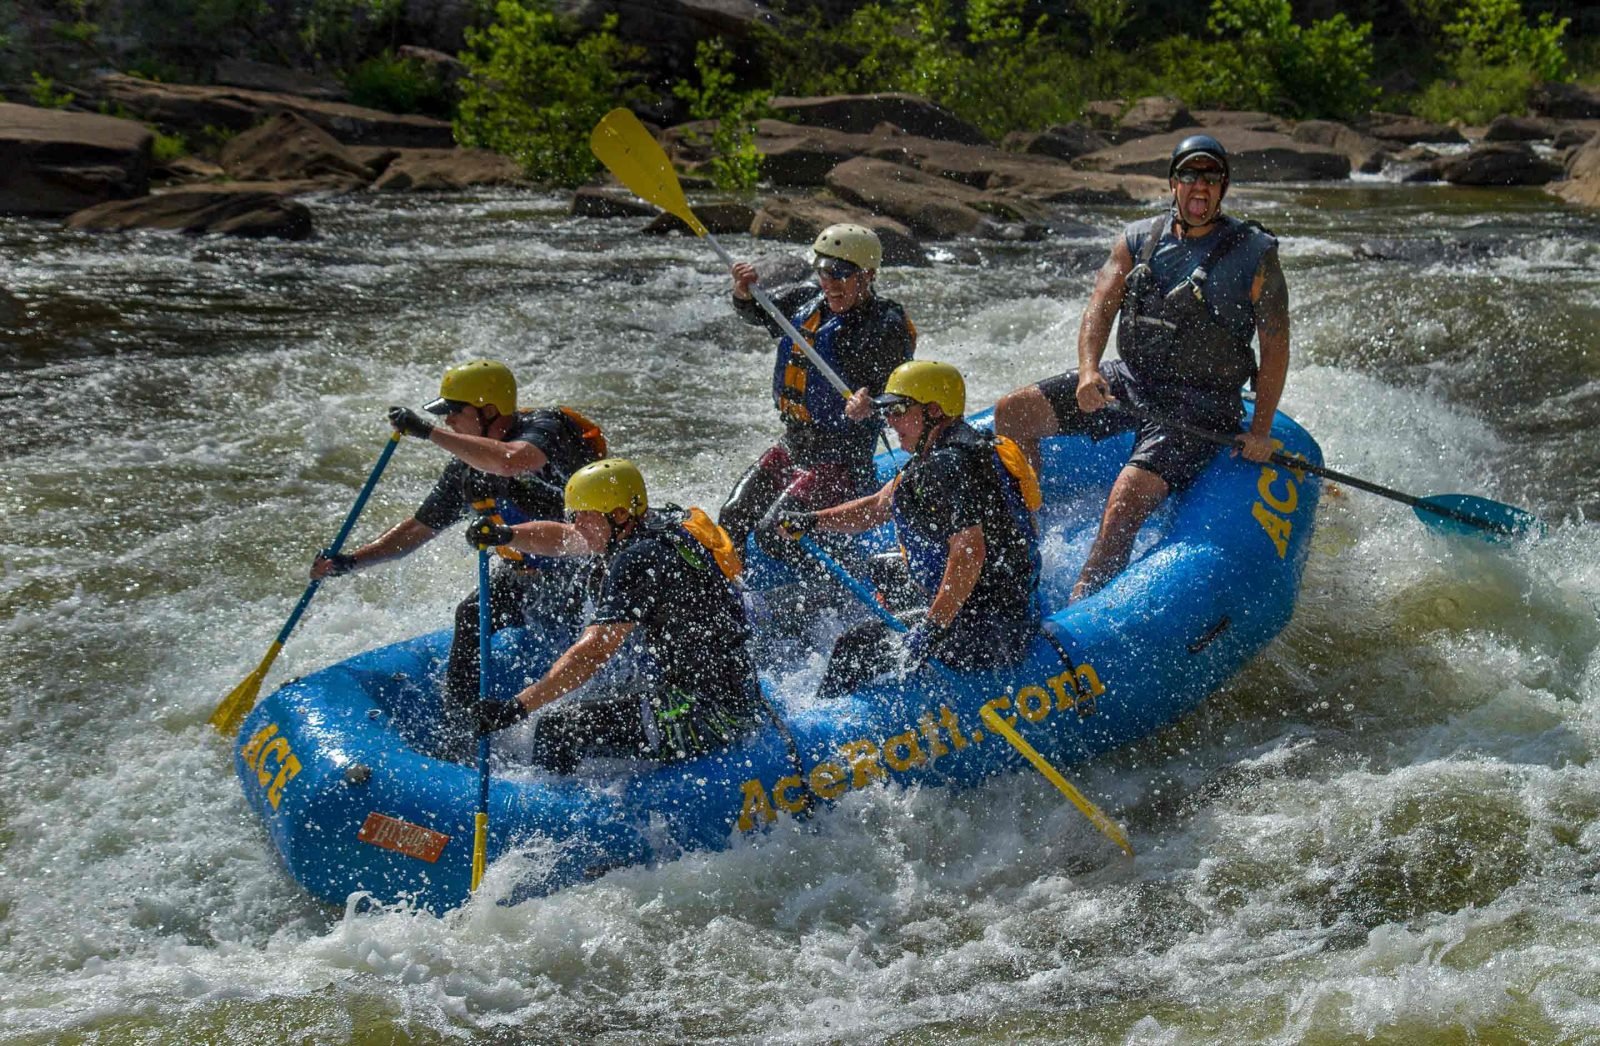 A group of four guests enjoy big hits in a small raft on the Lower Gauley River whitewater rafting with ACE Adventure Resort in West Virginia.